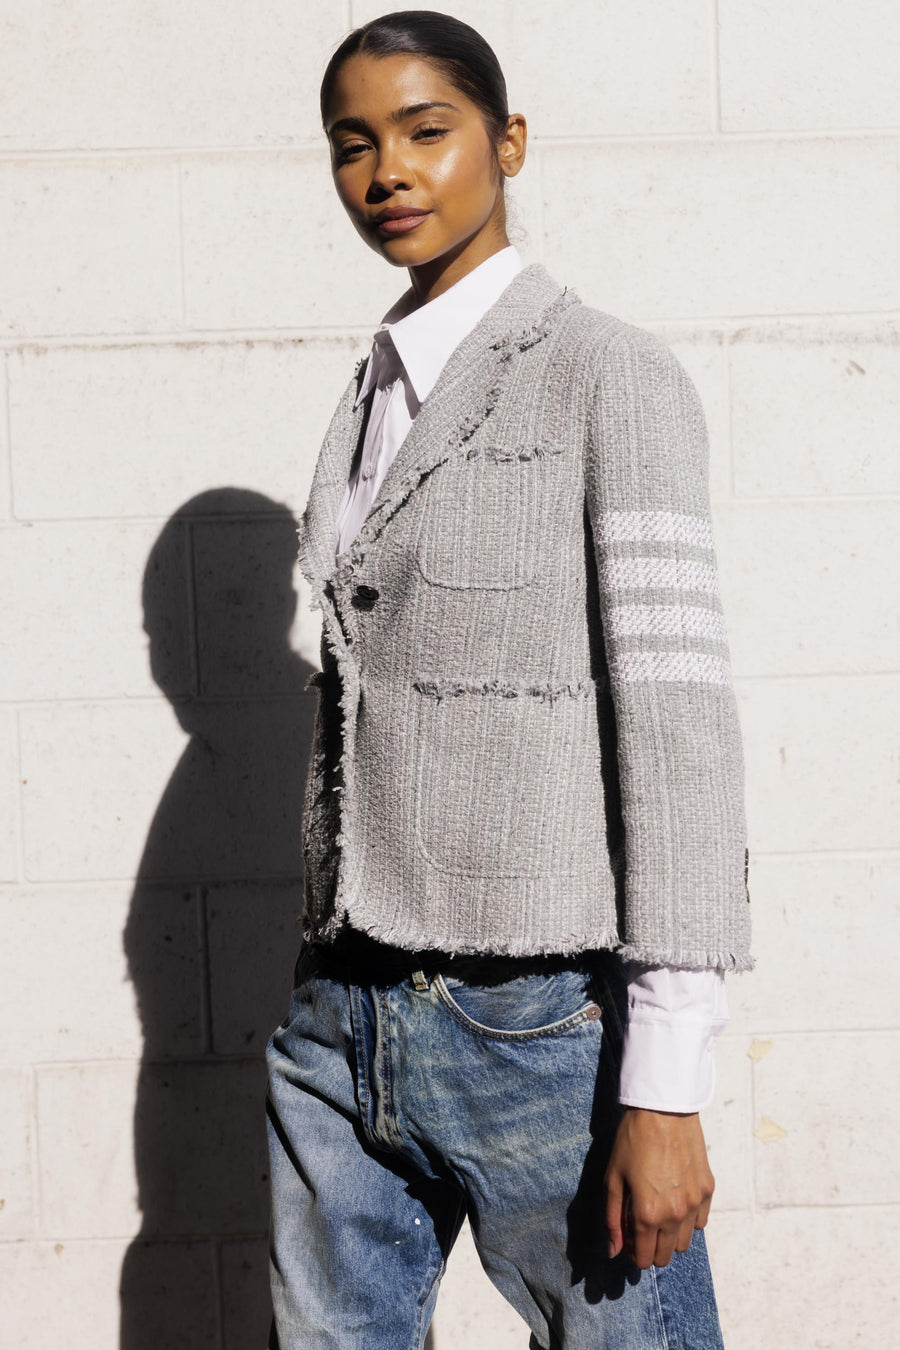 CROPPED SACK JACKET (UNCONSTRUCTED) IN WOVEN 4 BAR SOLID COTTON TWEED IN MED GREY